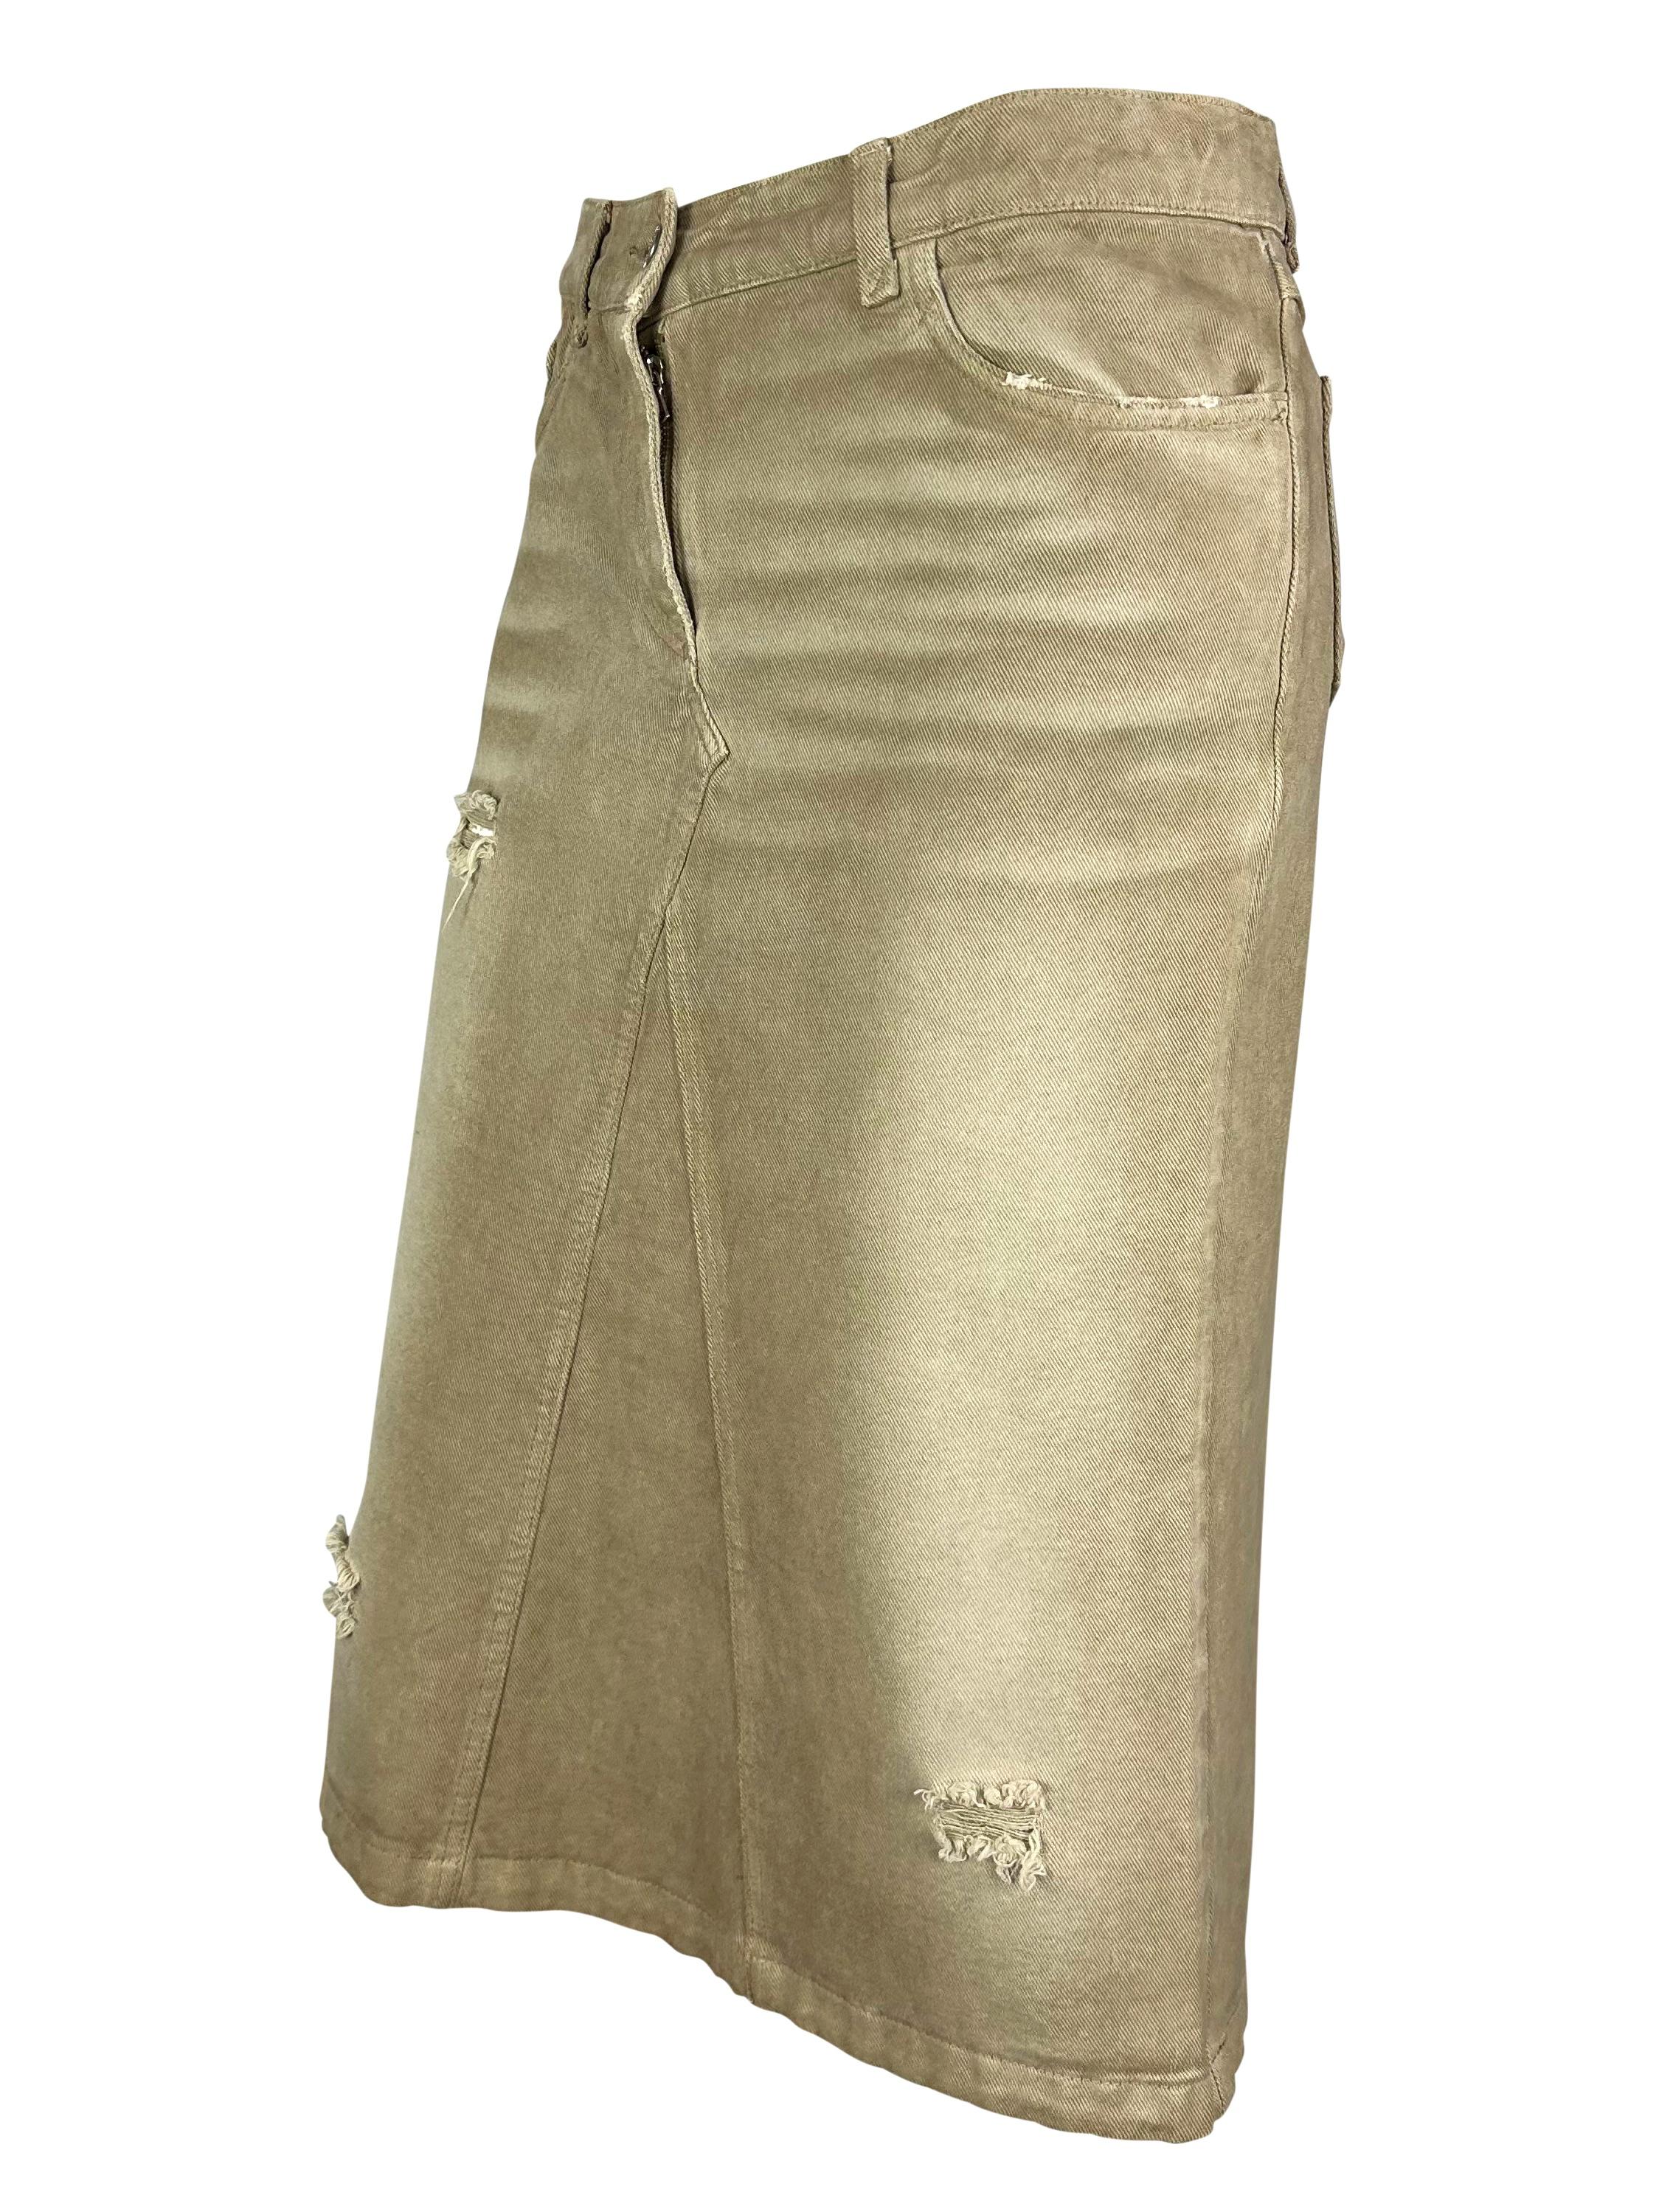 Presenting a fabulous beige distressed denim Dolce and Gabbana skirt. From the late 1990s, this vintage midi skirt is purposefully distressed and is constructed to look like reworked jeans. Add this chic skirt to your wardrobe! 

Approximate